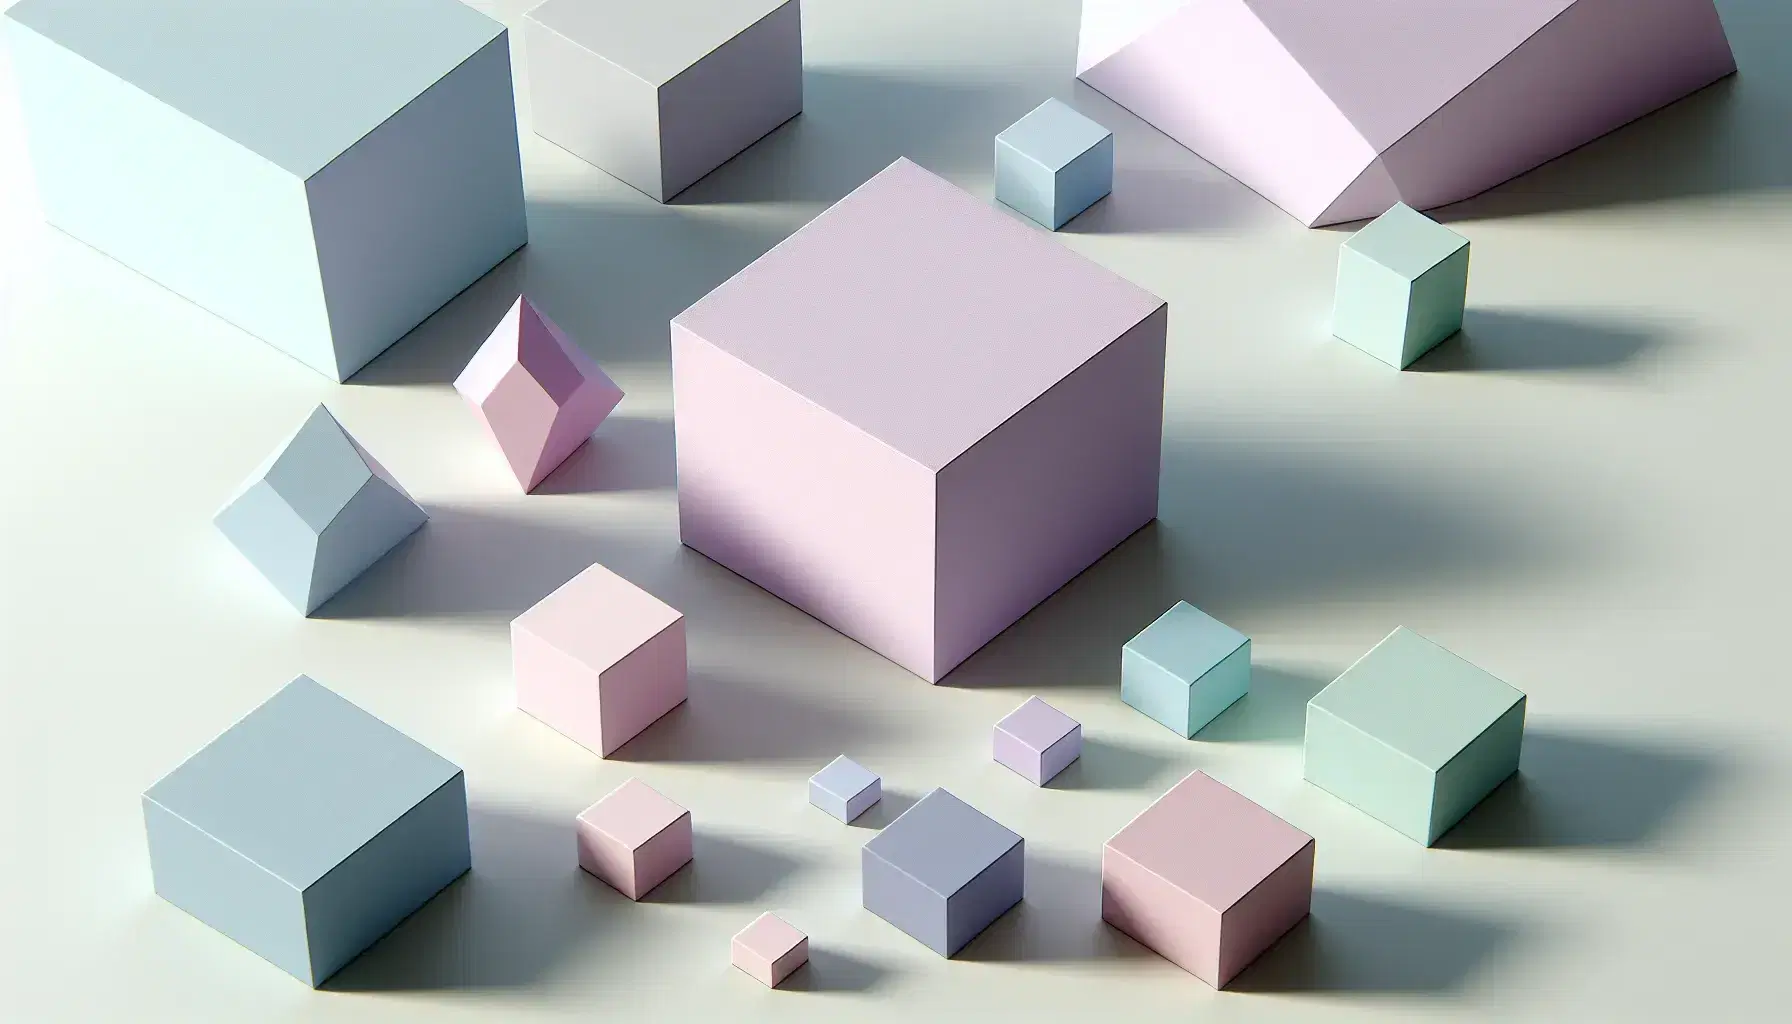 Pastel-colored rhombuses with soft shadows on a light gray background, arranged randomly with a prominent lavender rhombus at the center.